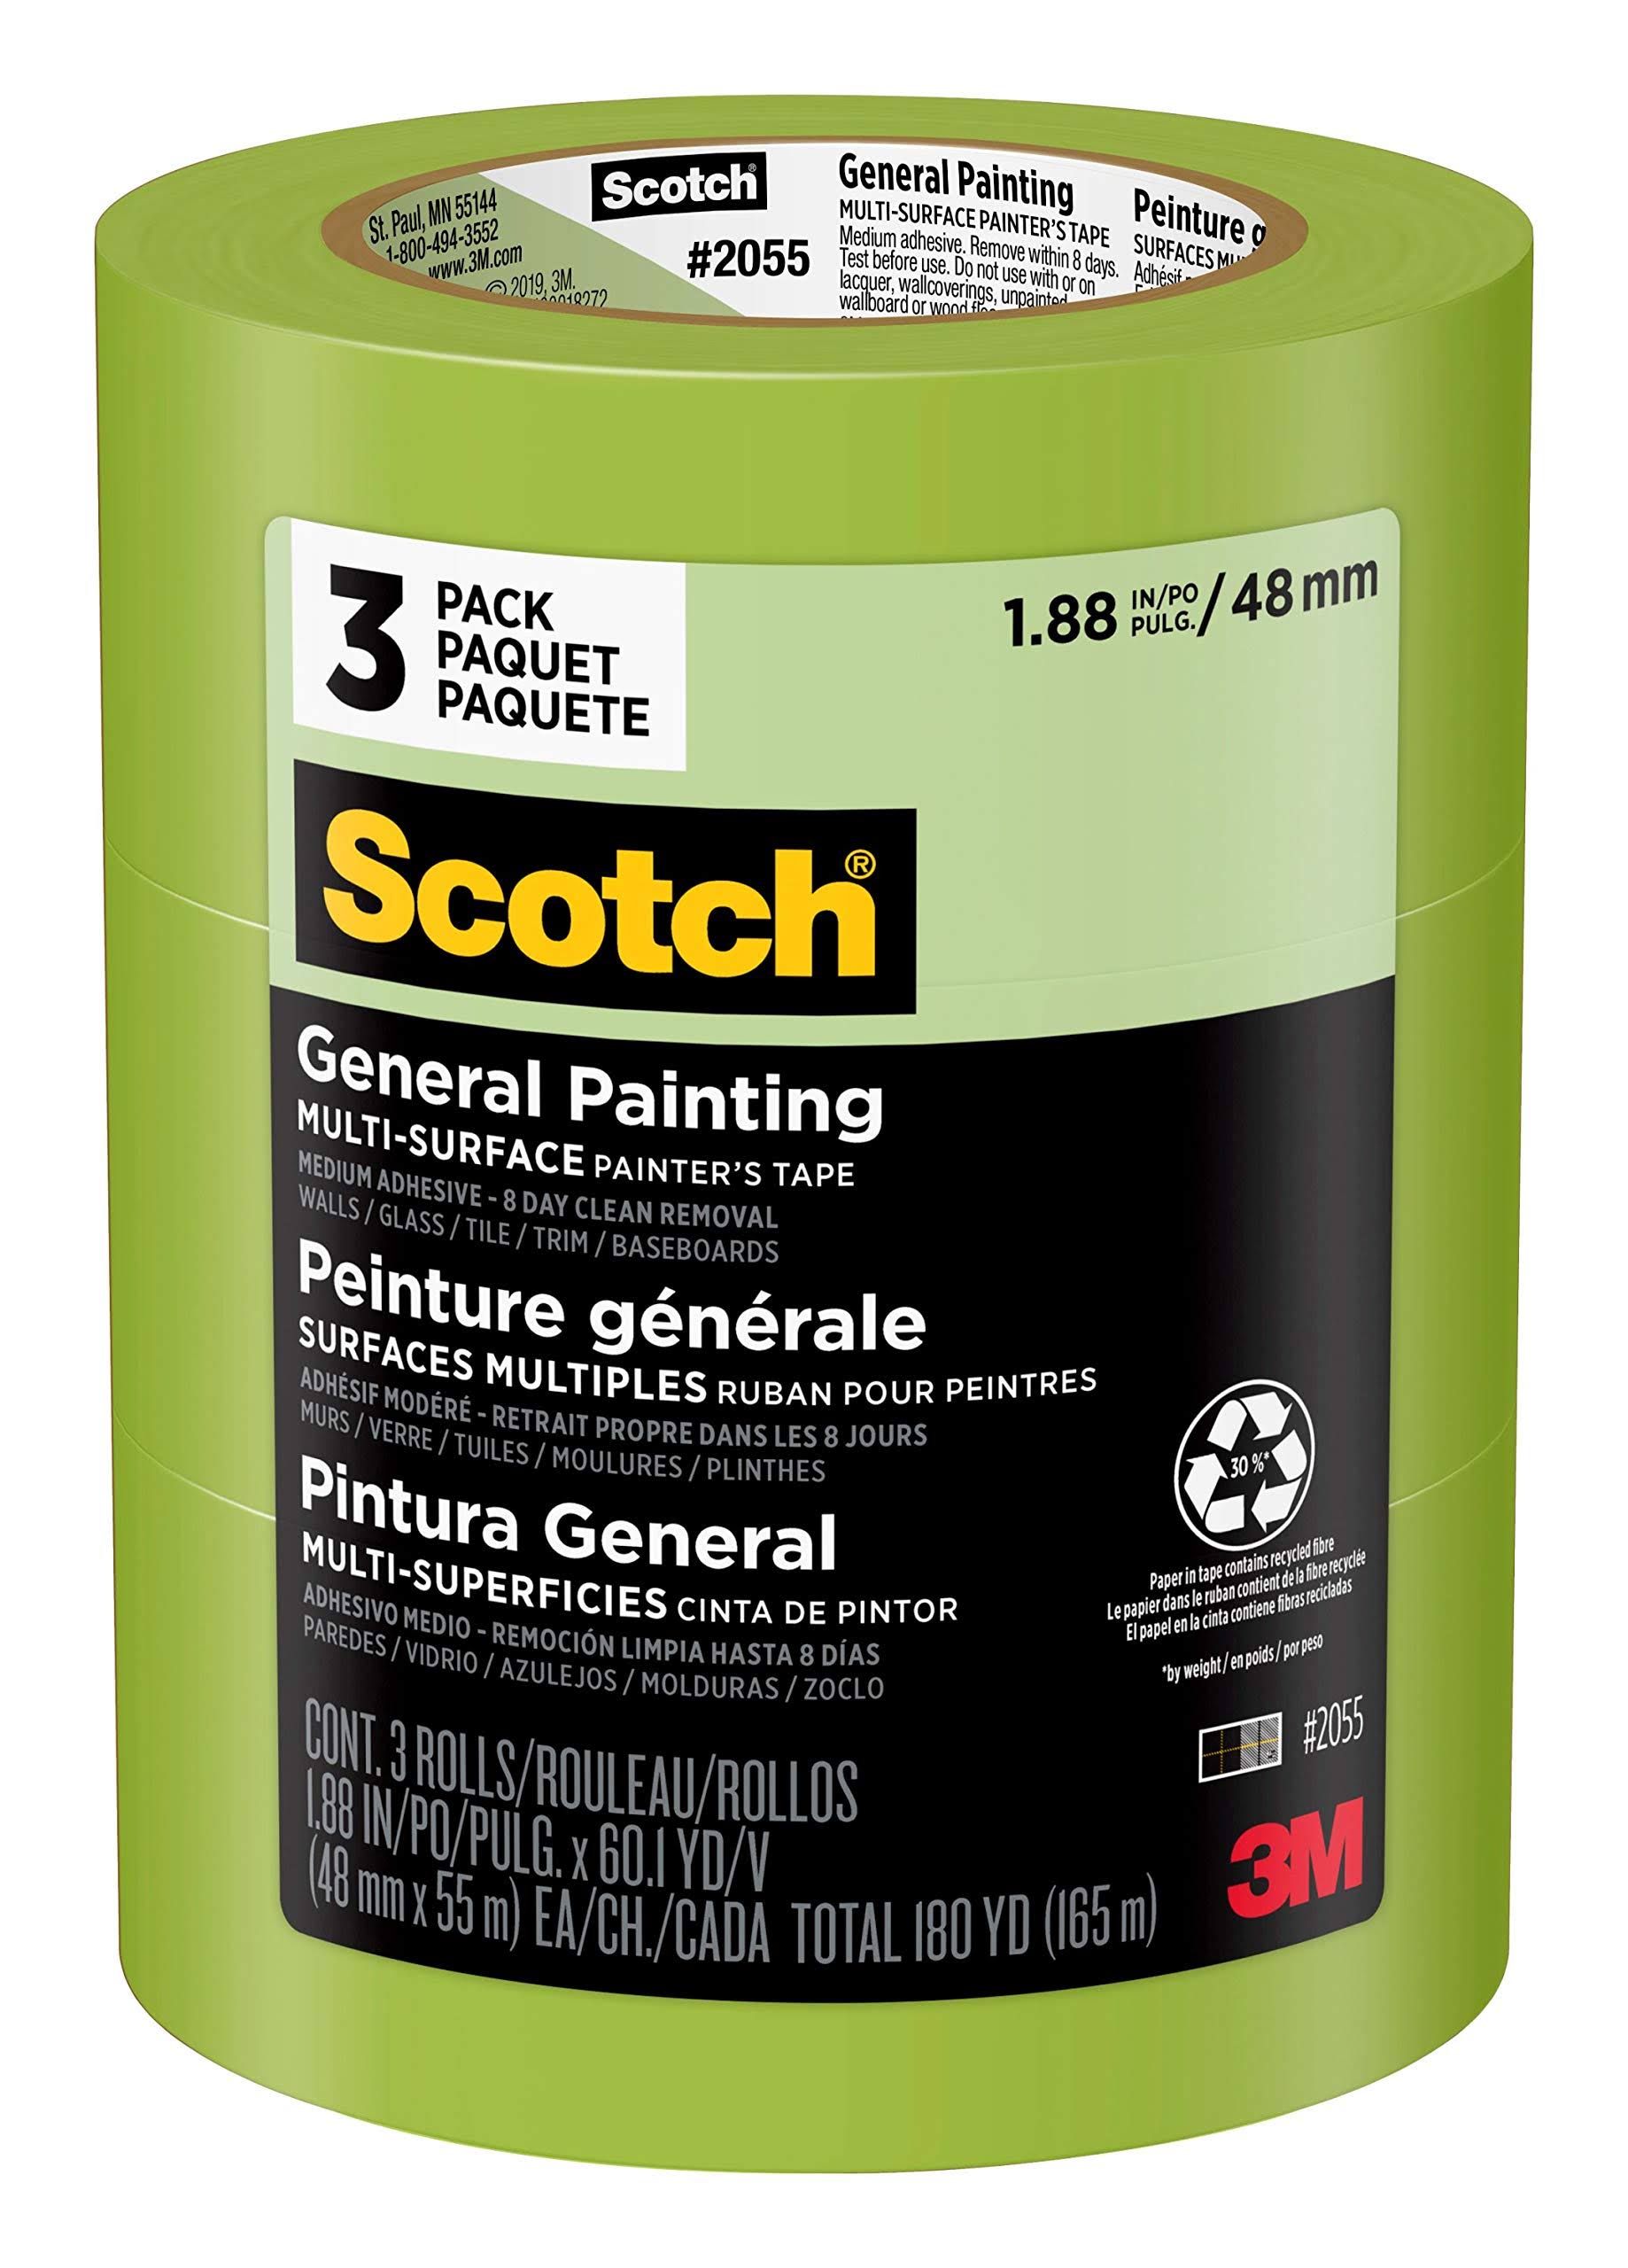 3M Scotch General Painting Multi-Surface Painter's Tape 2"CP